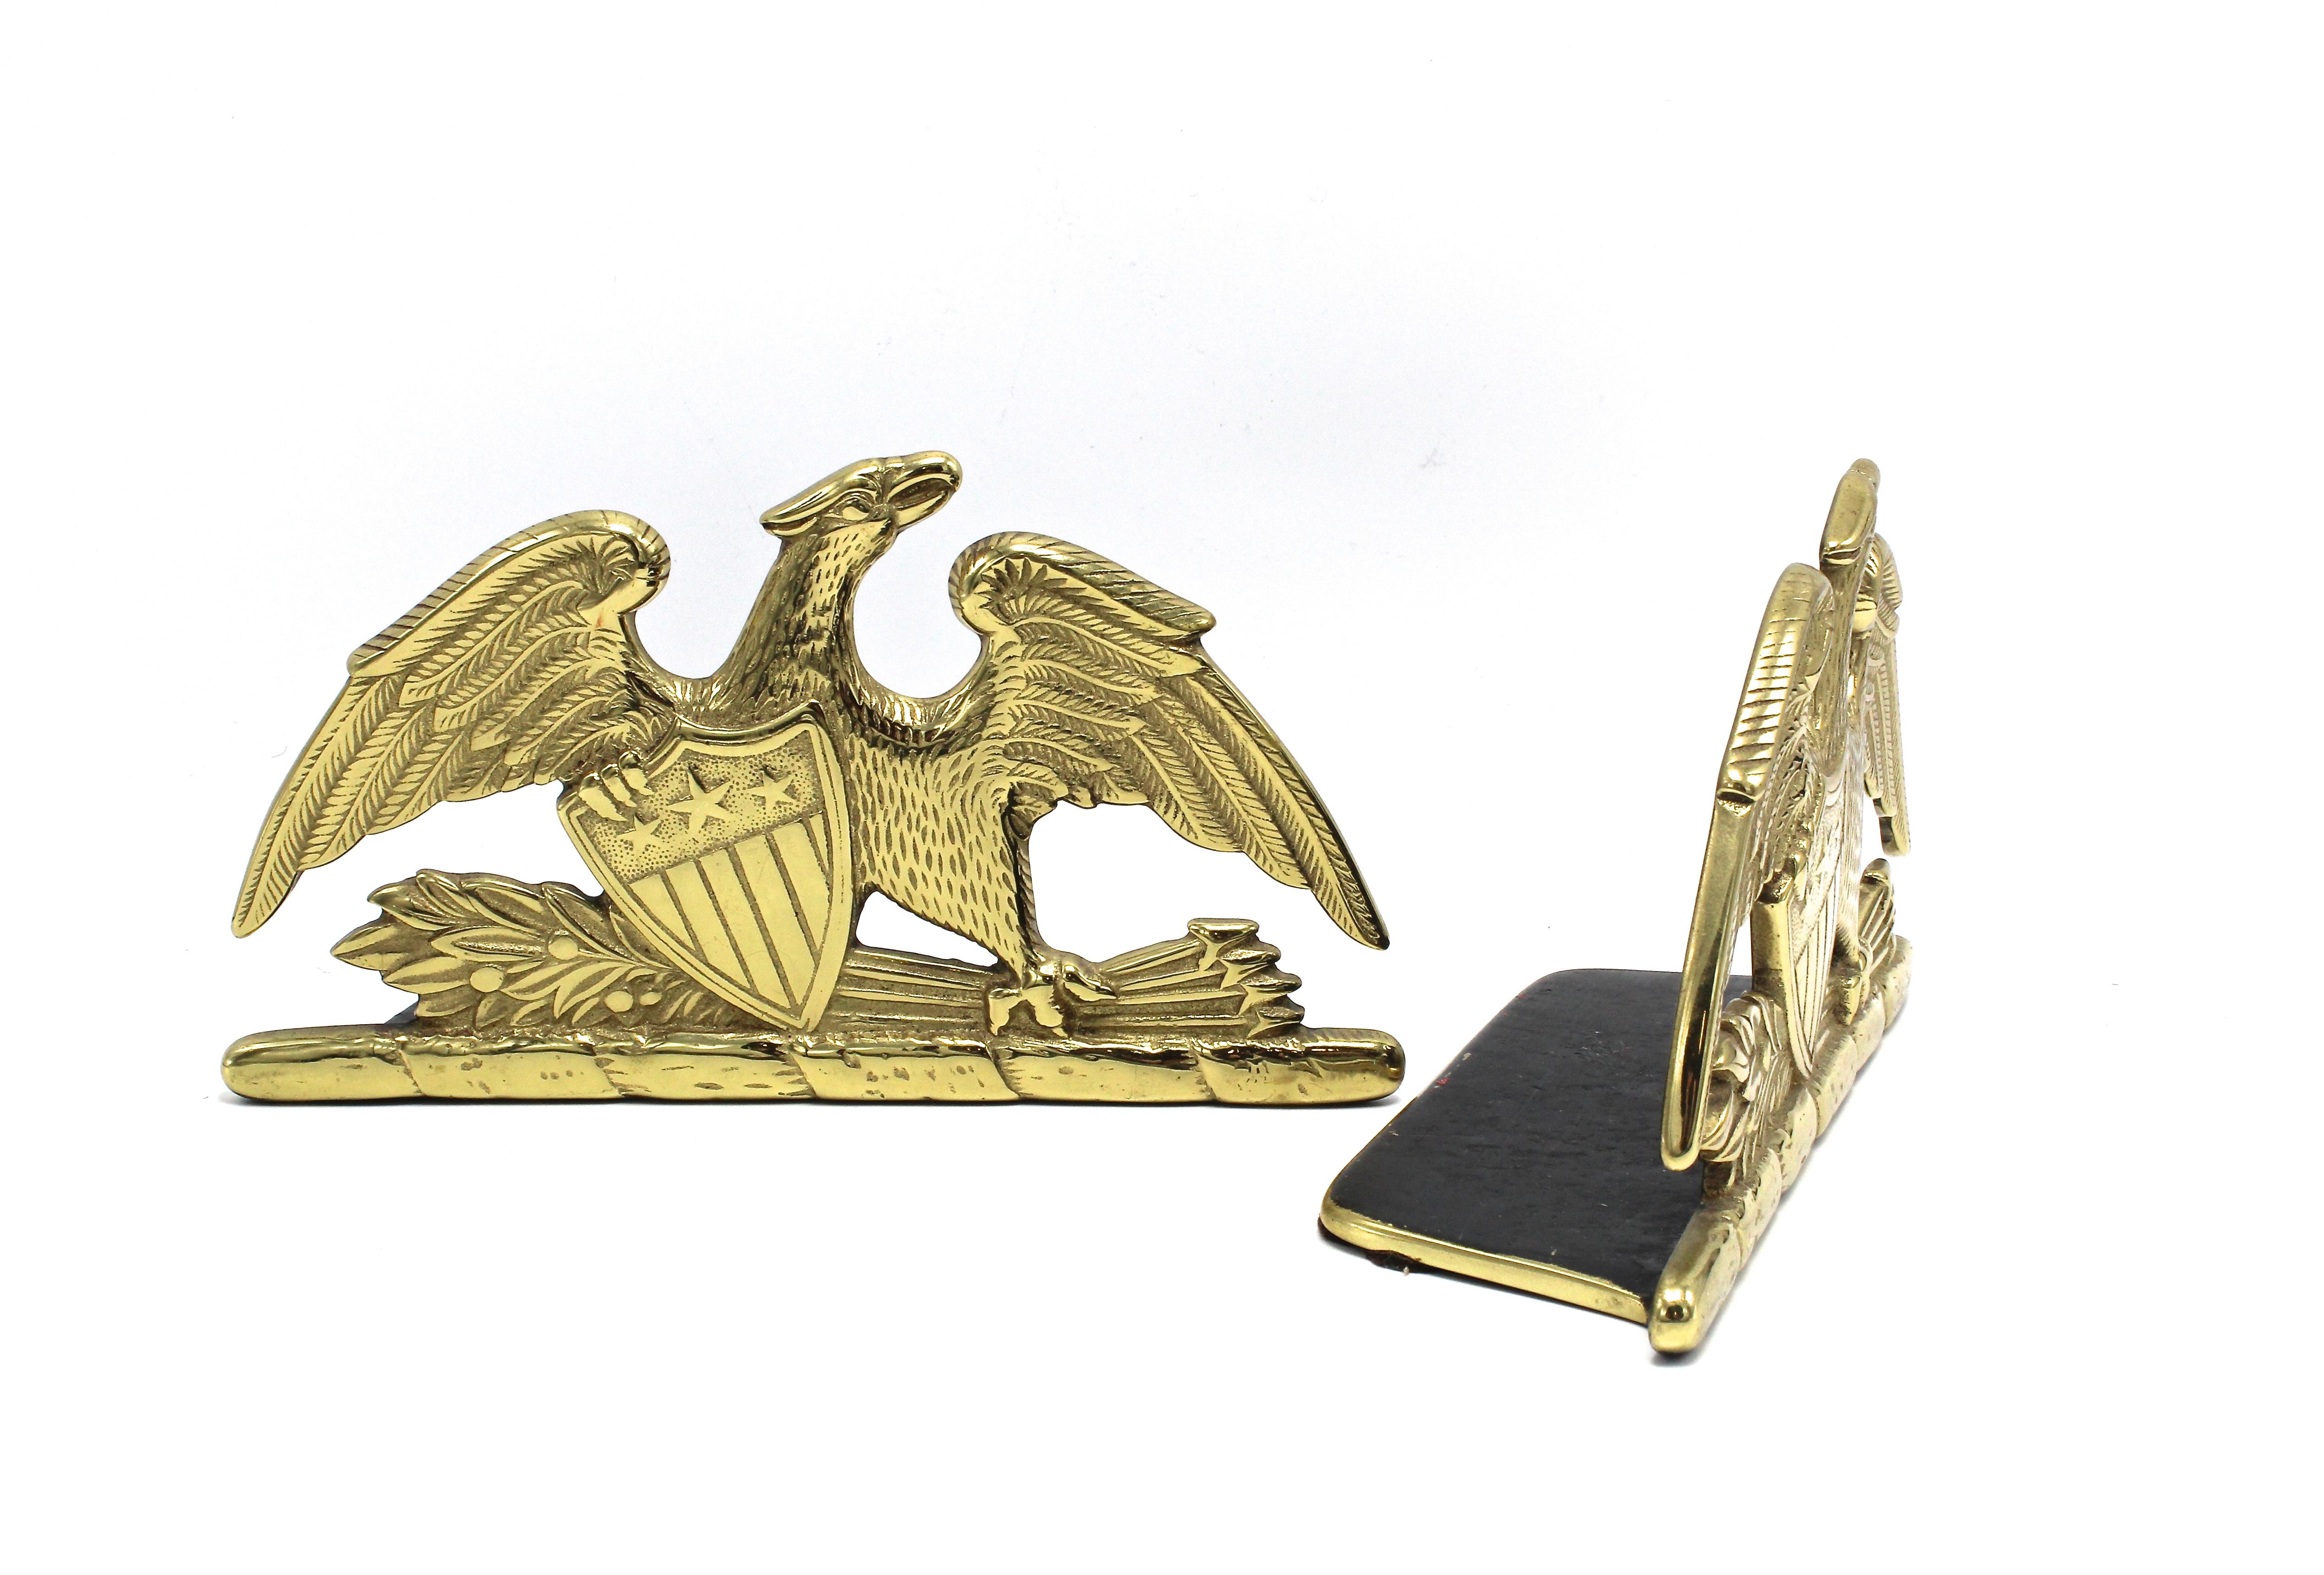 A beautiful pair of brass spread-wing eagle bookends by Virginia Metalcrafters, stamped 1952. The eagle is shown with its wings fully spread and a laurel branch and bundle of arrows clutched in its left talon. The eagle clutches a Union shield